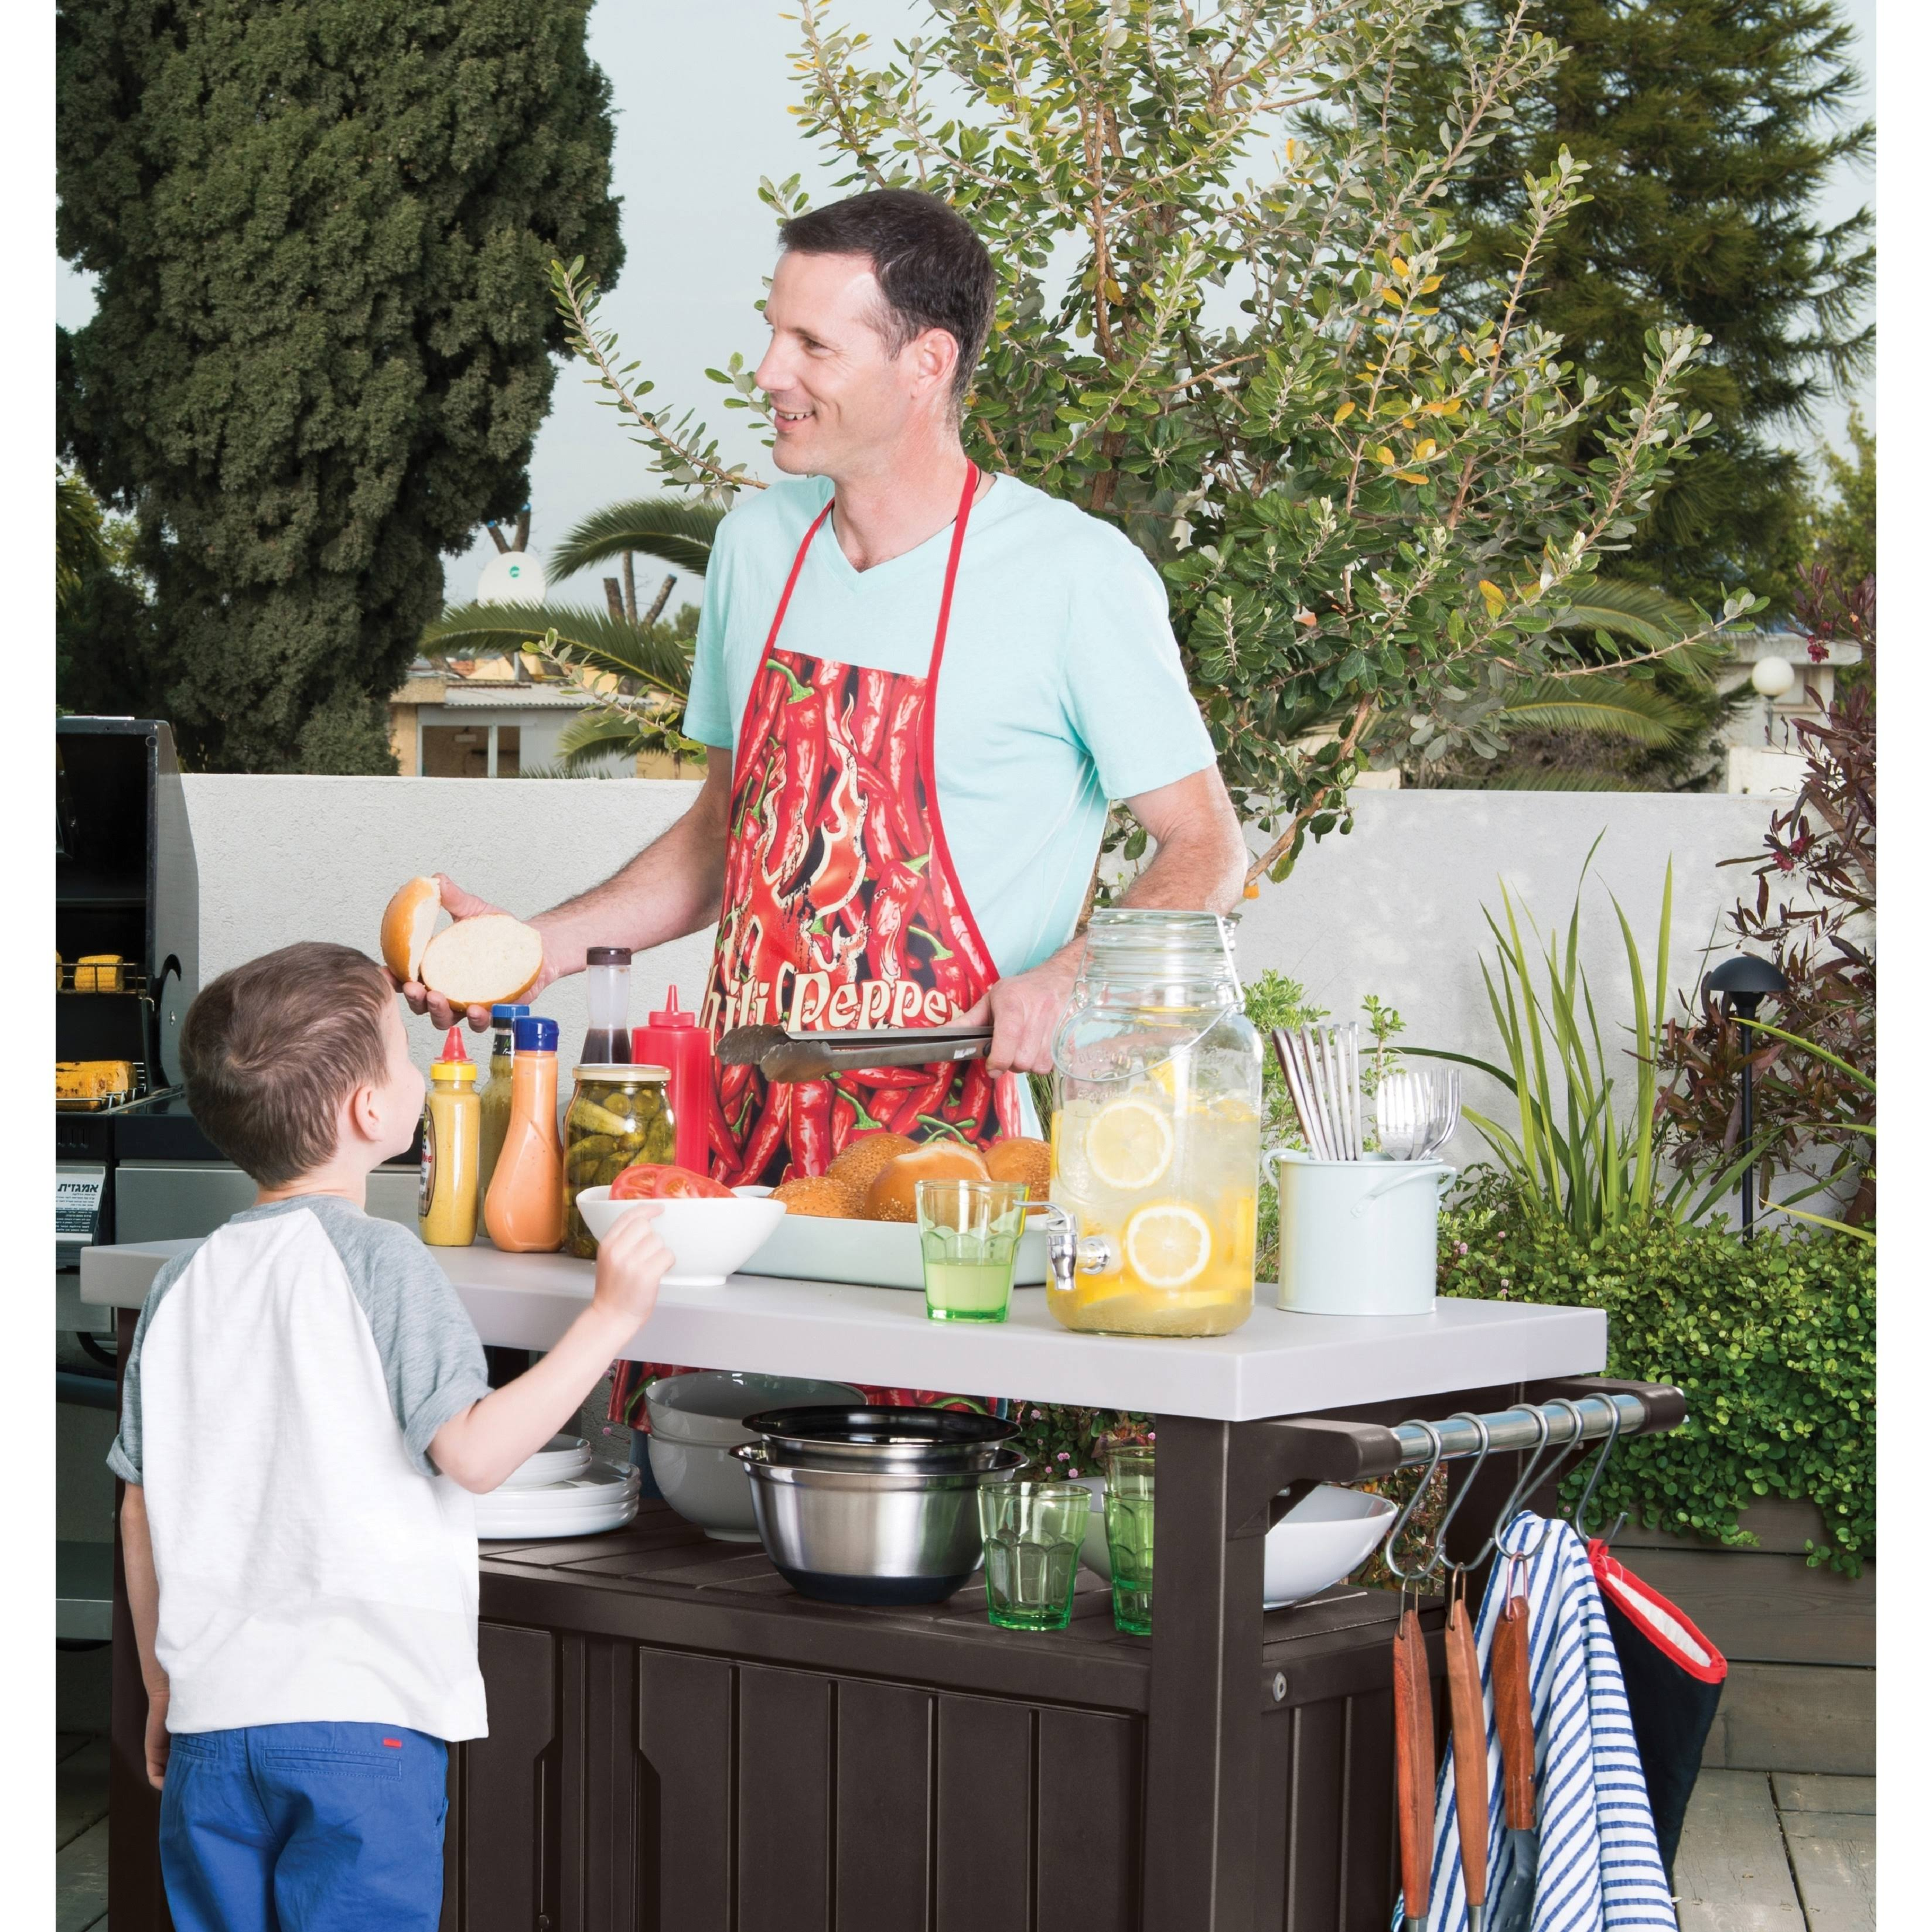 Keter Unity XL Portable Outdoor Table and Storage Cabinet with Accessory Hooks, Espresso Brown